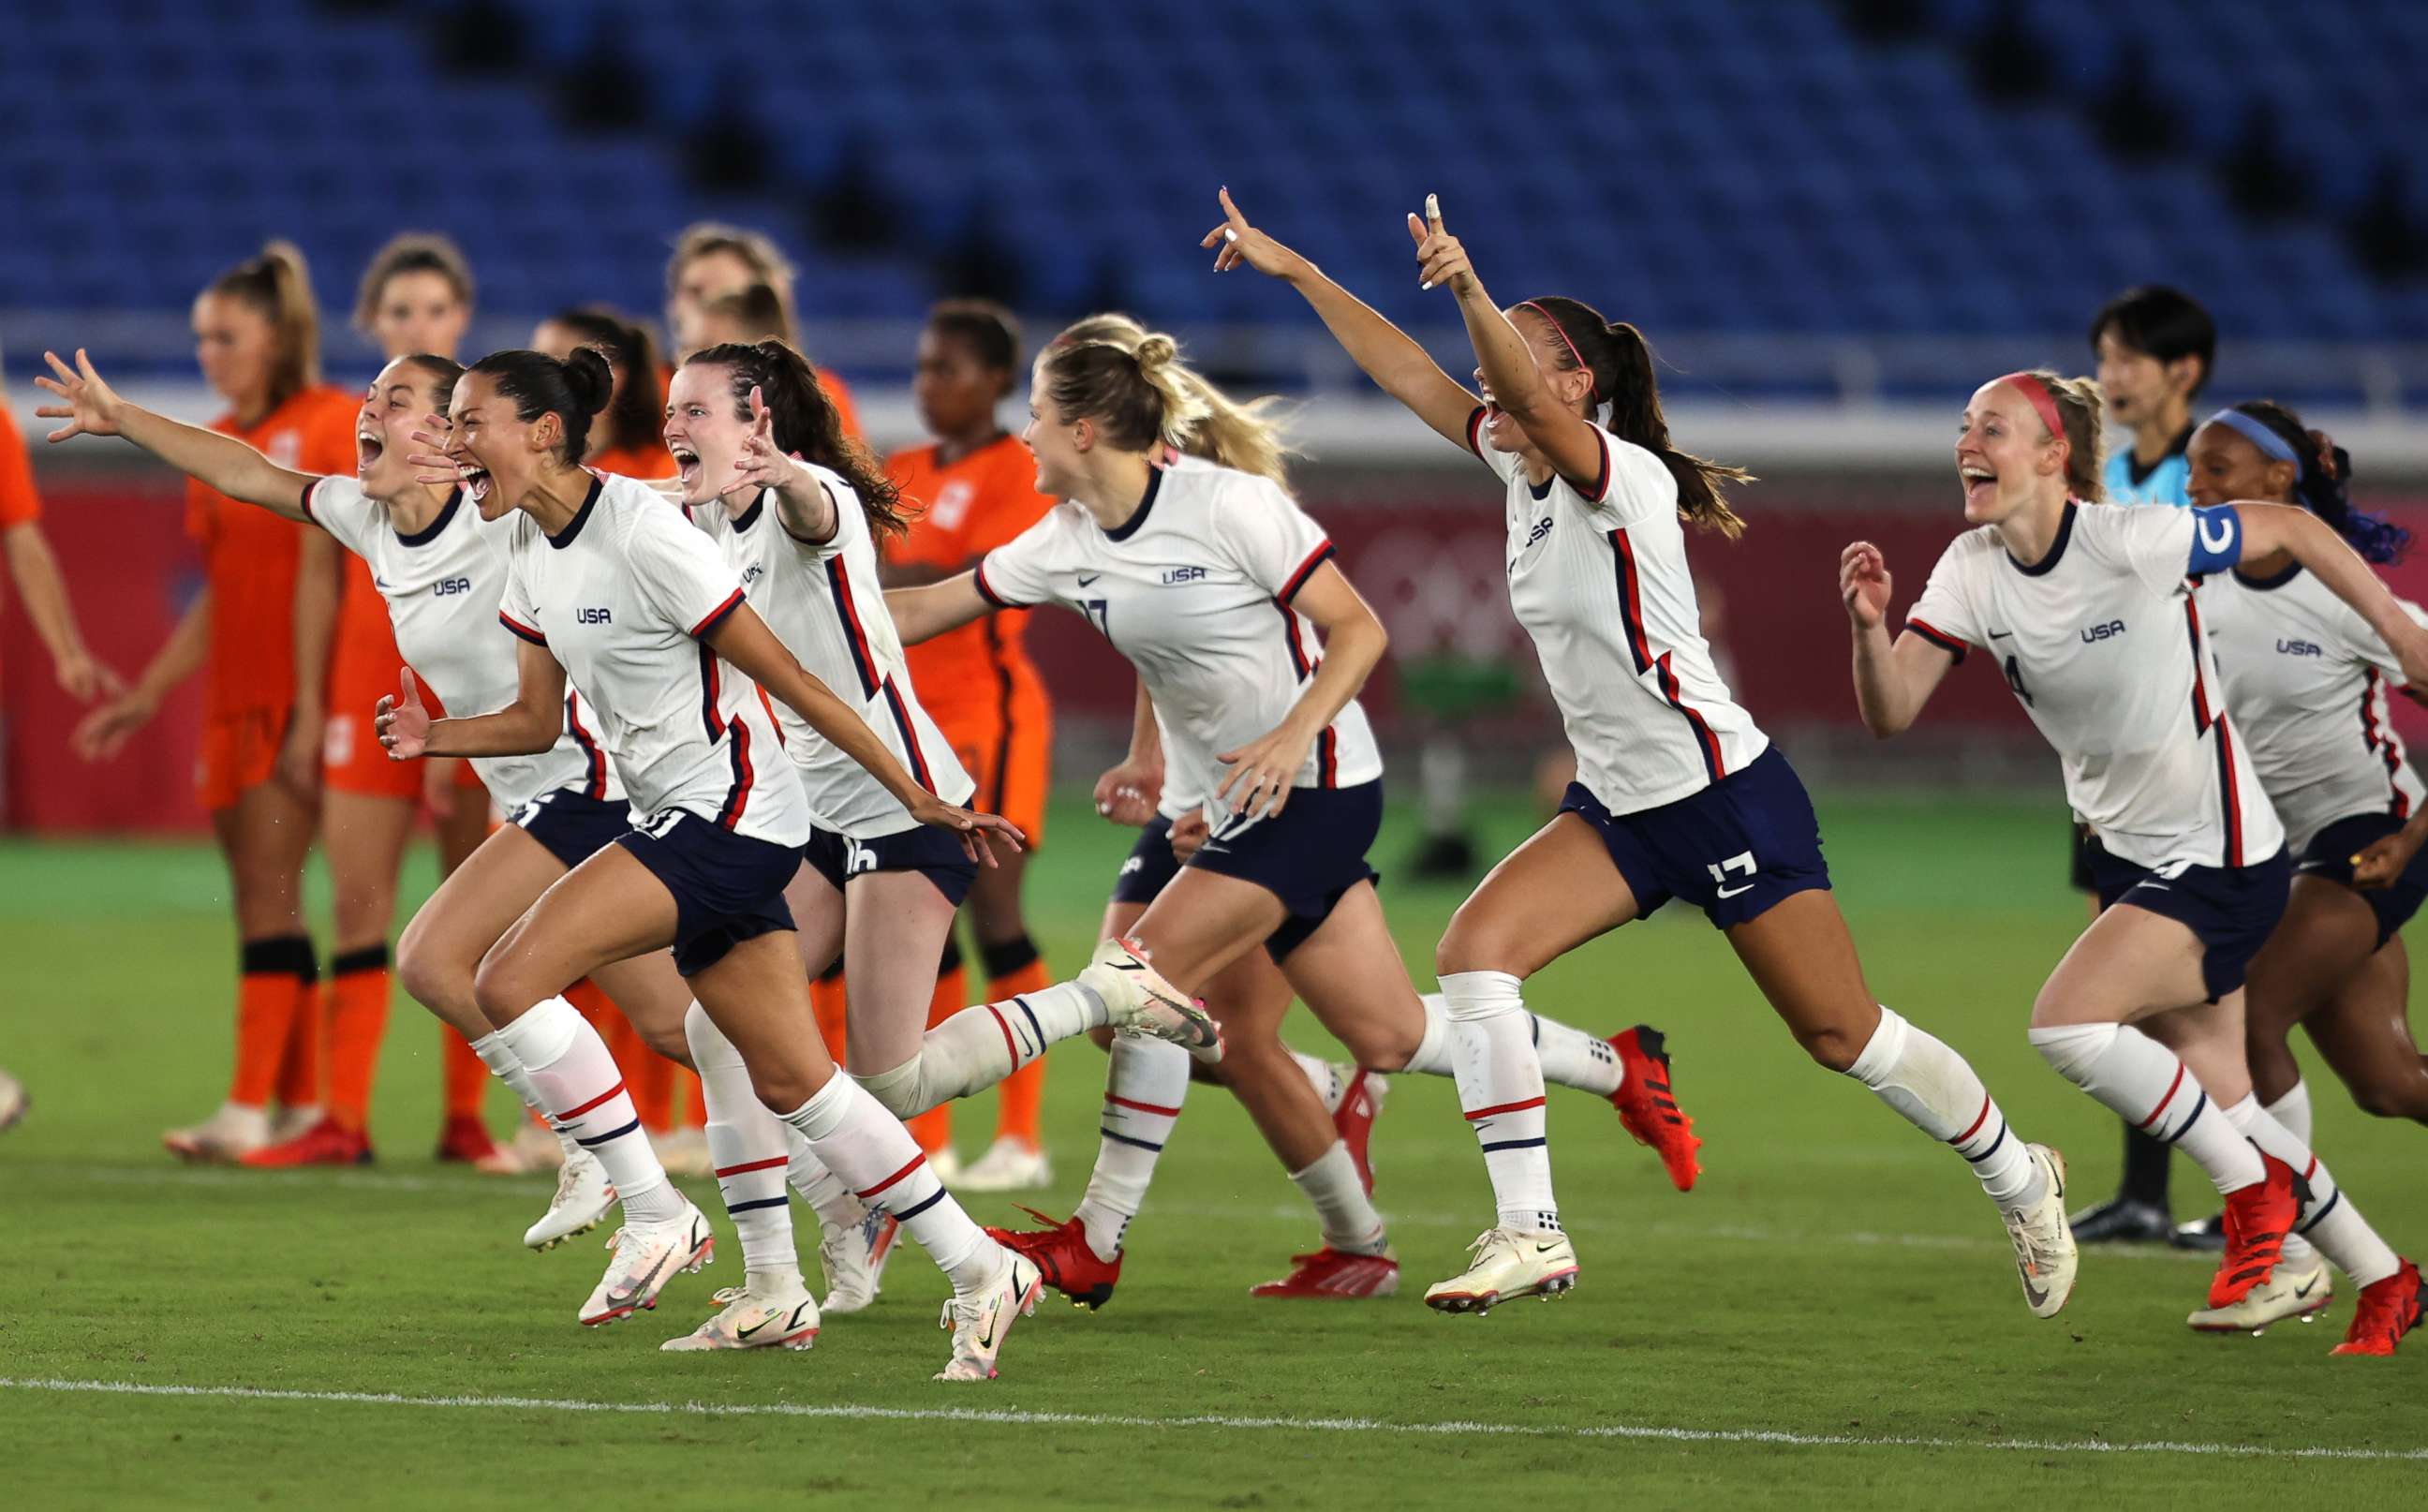 PHOTO: The United States teams celebrates following their team's victory in the penalty shoot out during the Women's Quarter Final match against the Netherlands at the Tokyo 2020 Olympic Games, July 30, 2021, in Yokohama, Kanagawa, Japan.